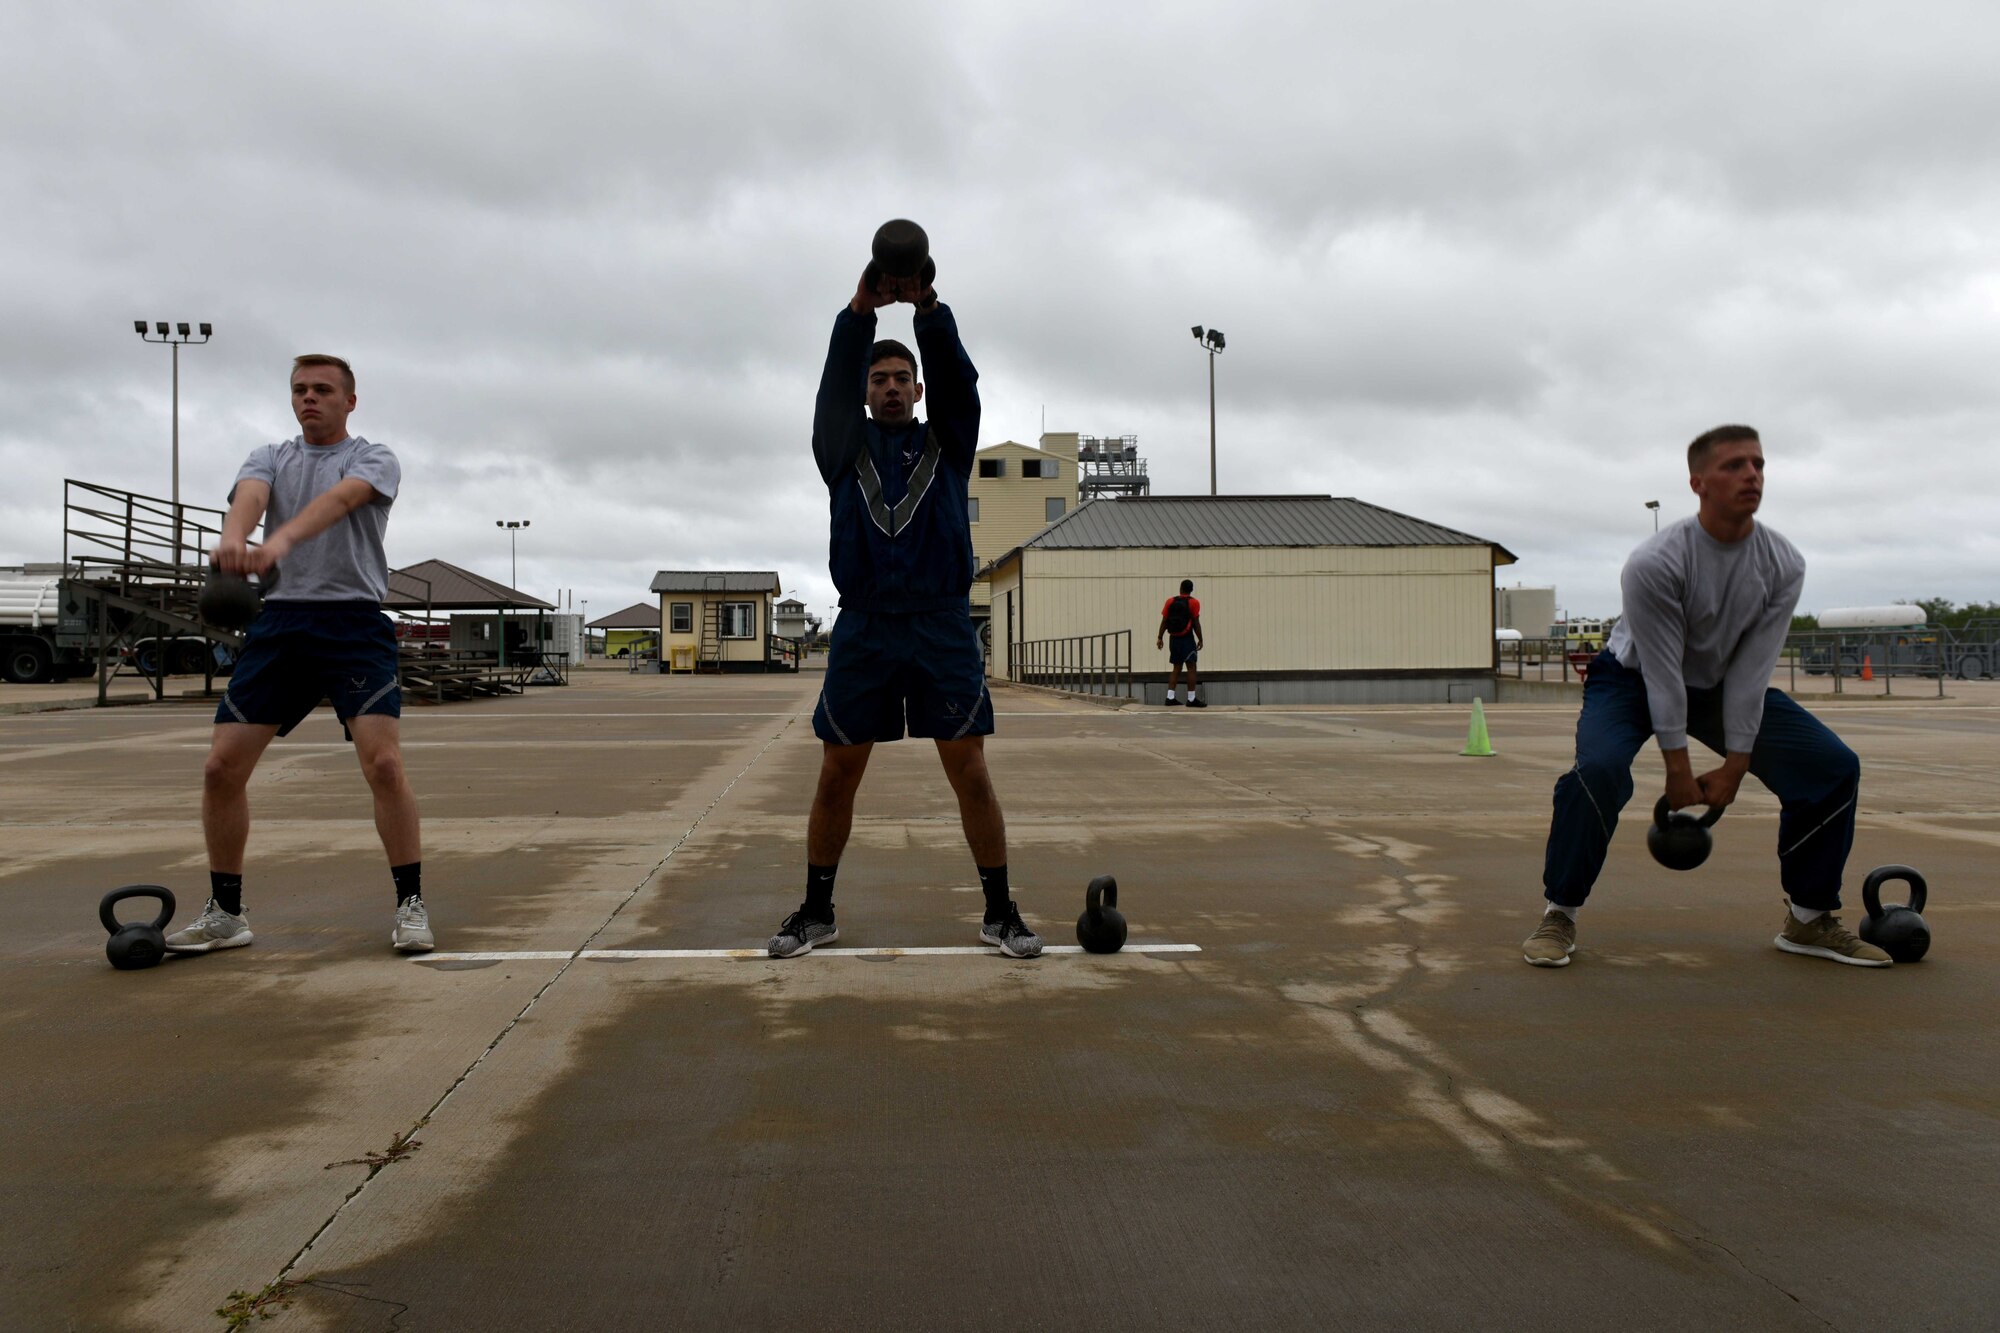 Airman Haden Stoner, Airman Jake Peterson and Airman 1st Class Garrett Rivett, 312th Training Squadron students, lift kettlebells during the Blood, Sweat and Stairs competition at the Louis F. Garland Department of Defense Fire Academy on Goodfellow Air Force Base, Texas, Sept. 22, 2018. Participants would lift the weights 40 times then carry them 20 yards. (U.S. Air Force photo by Senior Airman Randall Moose/Released)